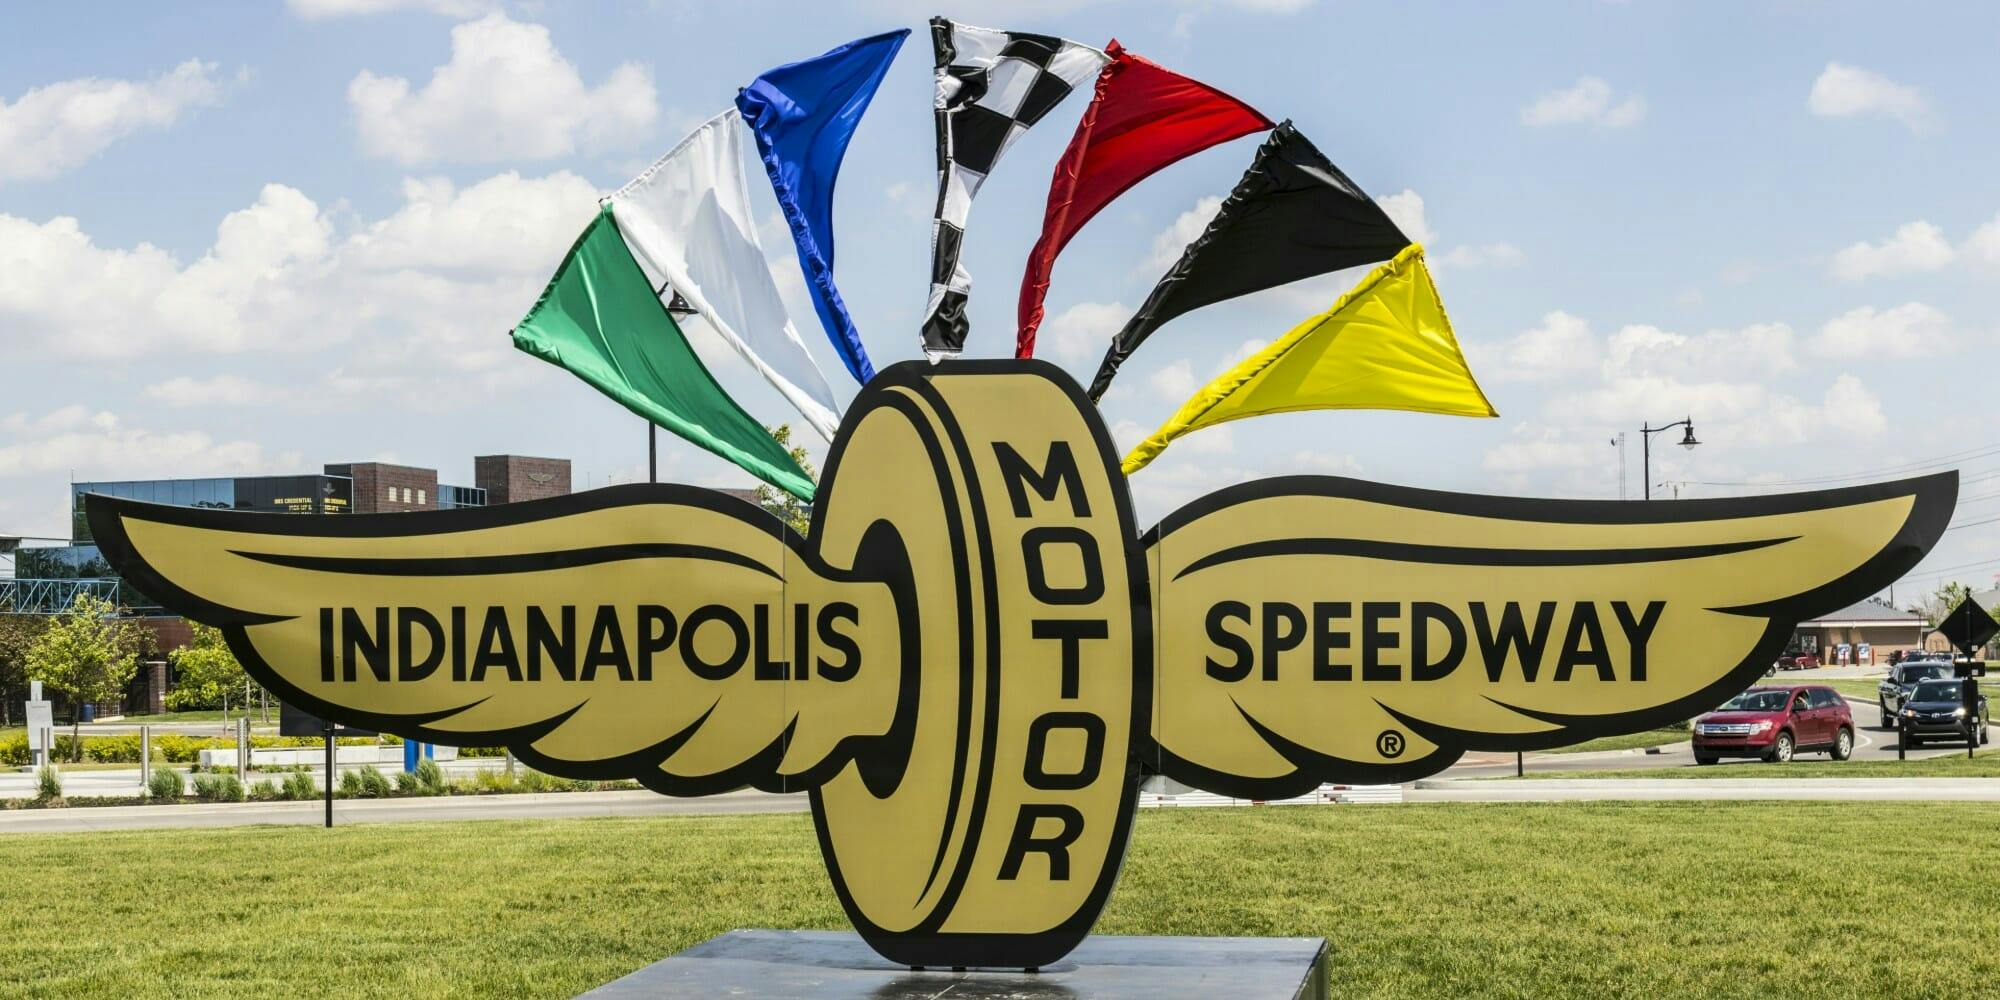 Indy 500 Live Stream: Watch the Indianapolis 500 for Free